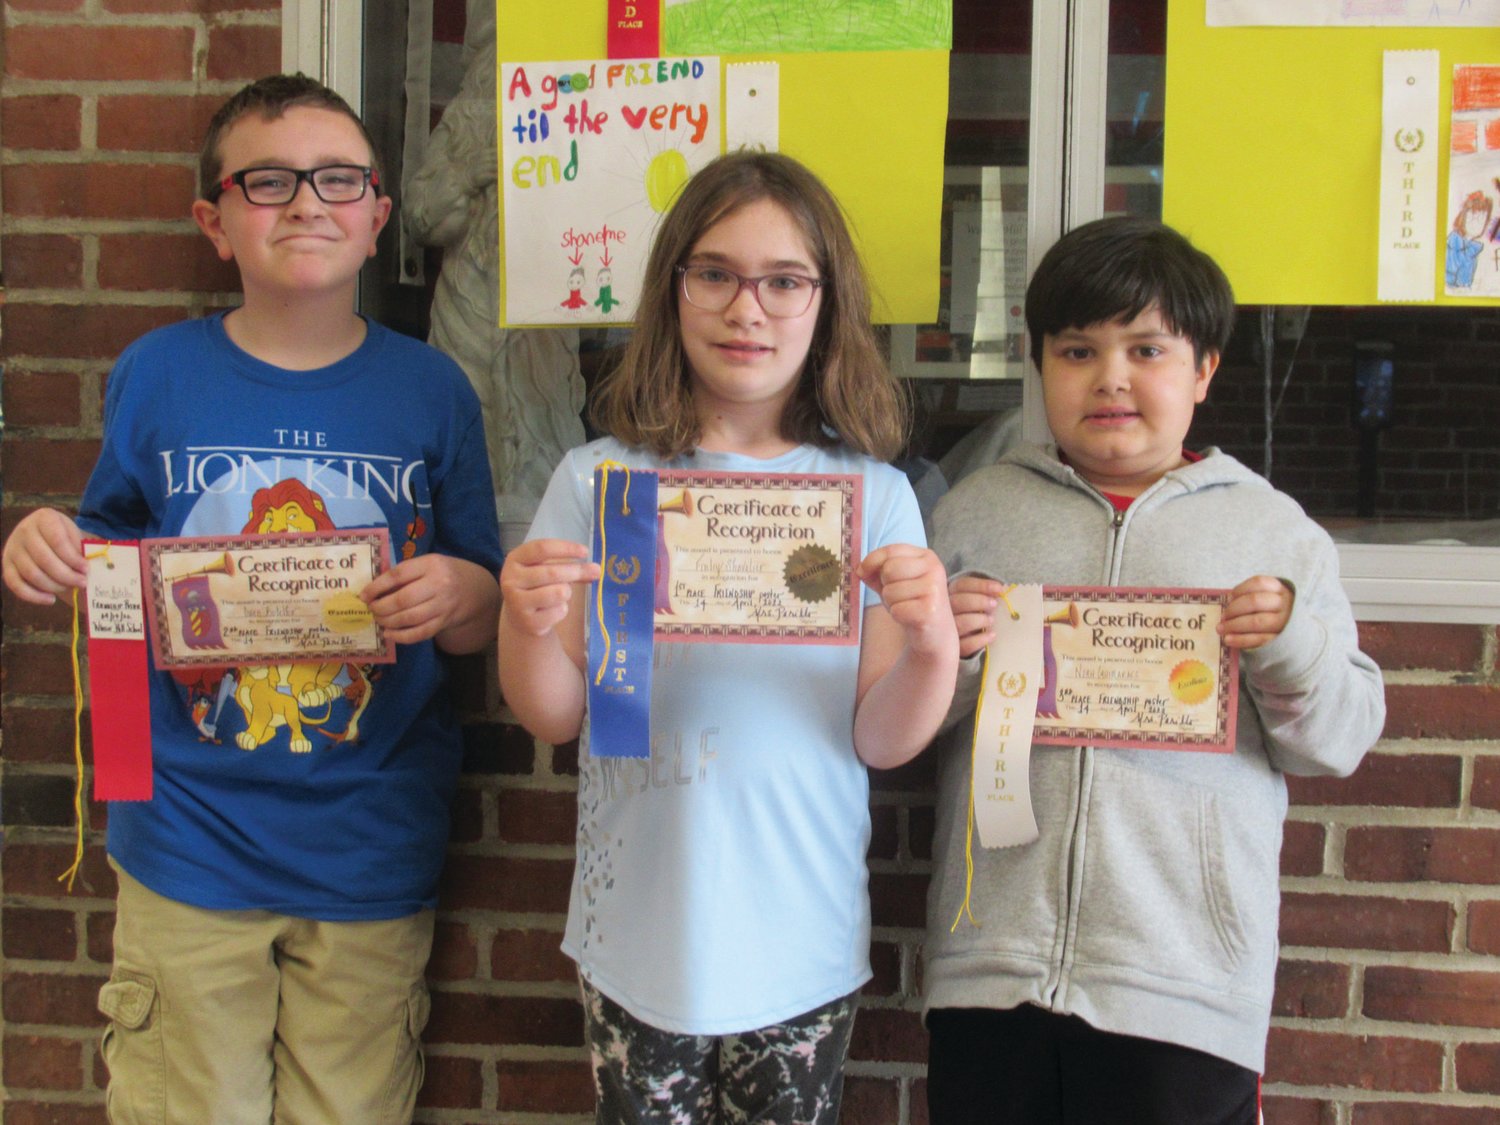 KIND KIDS: Winsor Hill students Owen Botelho (left), took second place in the school’s Friendship Poster Contest while Finley Shavlier was first and Noah Guimmaraes placed third.